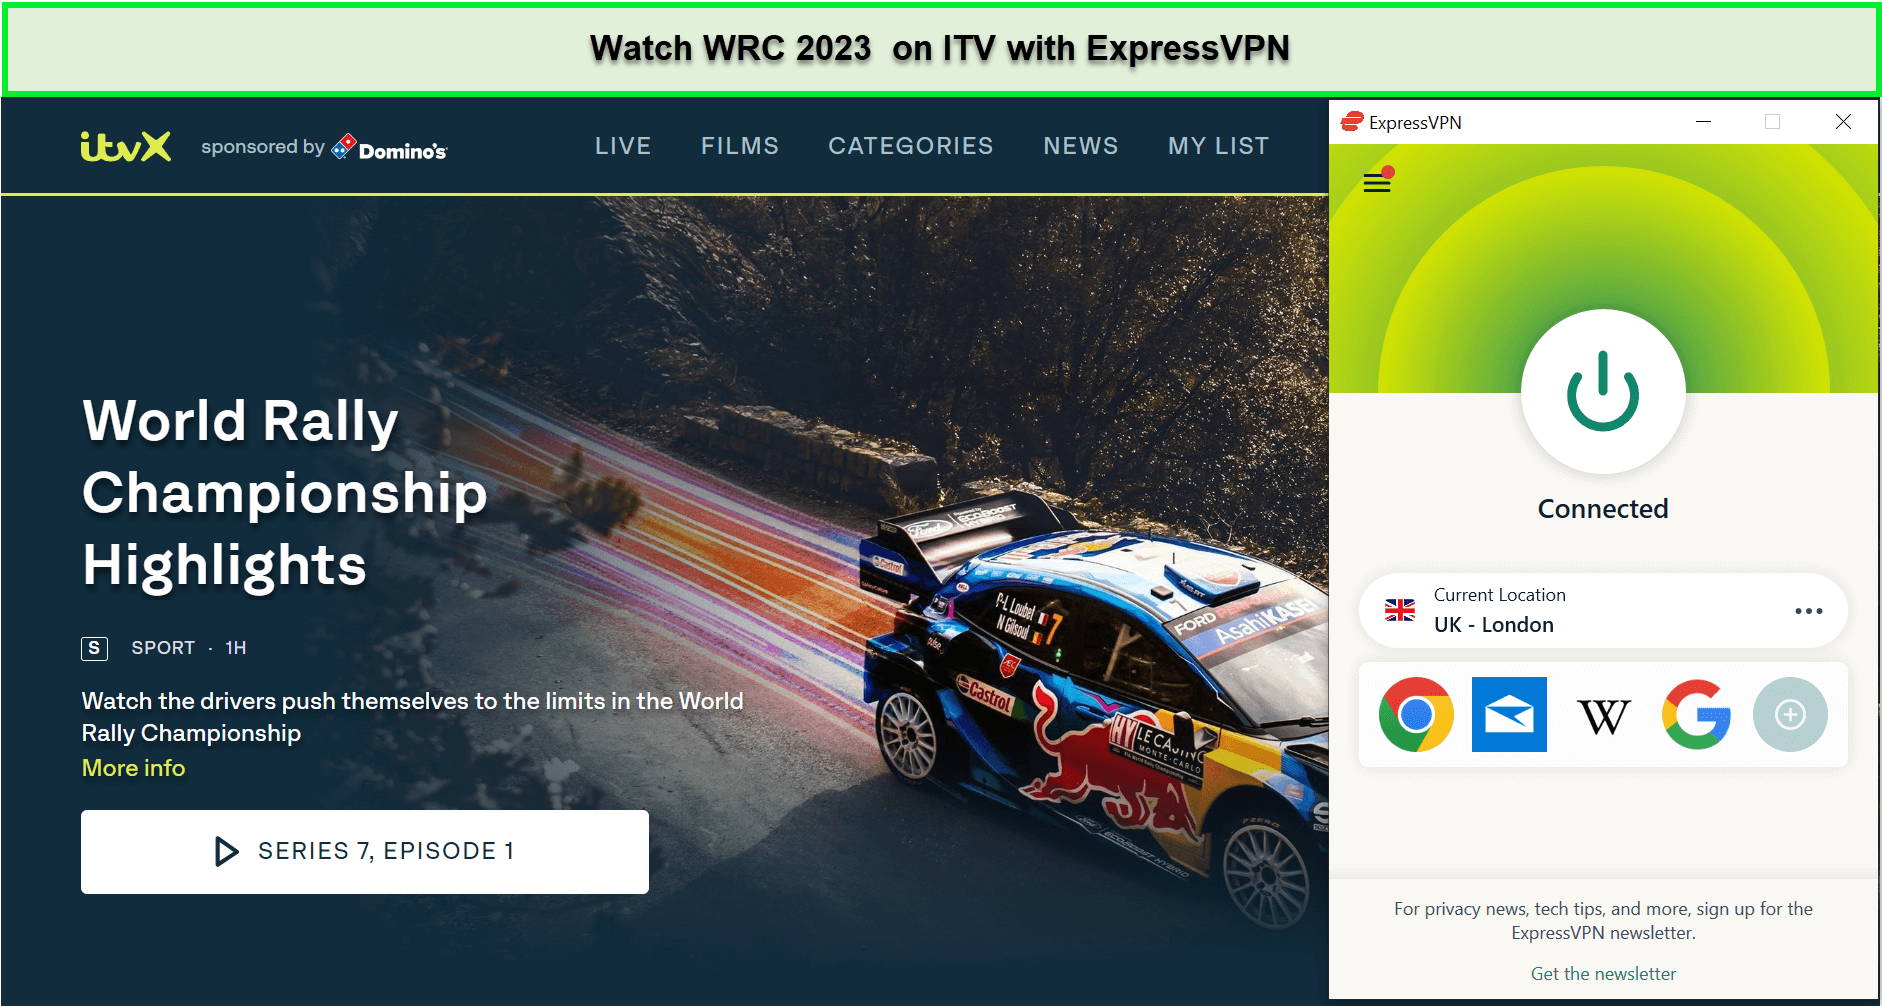 Watch-WRC-2023-in-USA-on-ITV-with-ExpressVPN